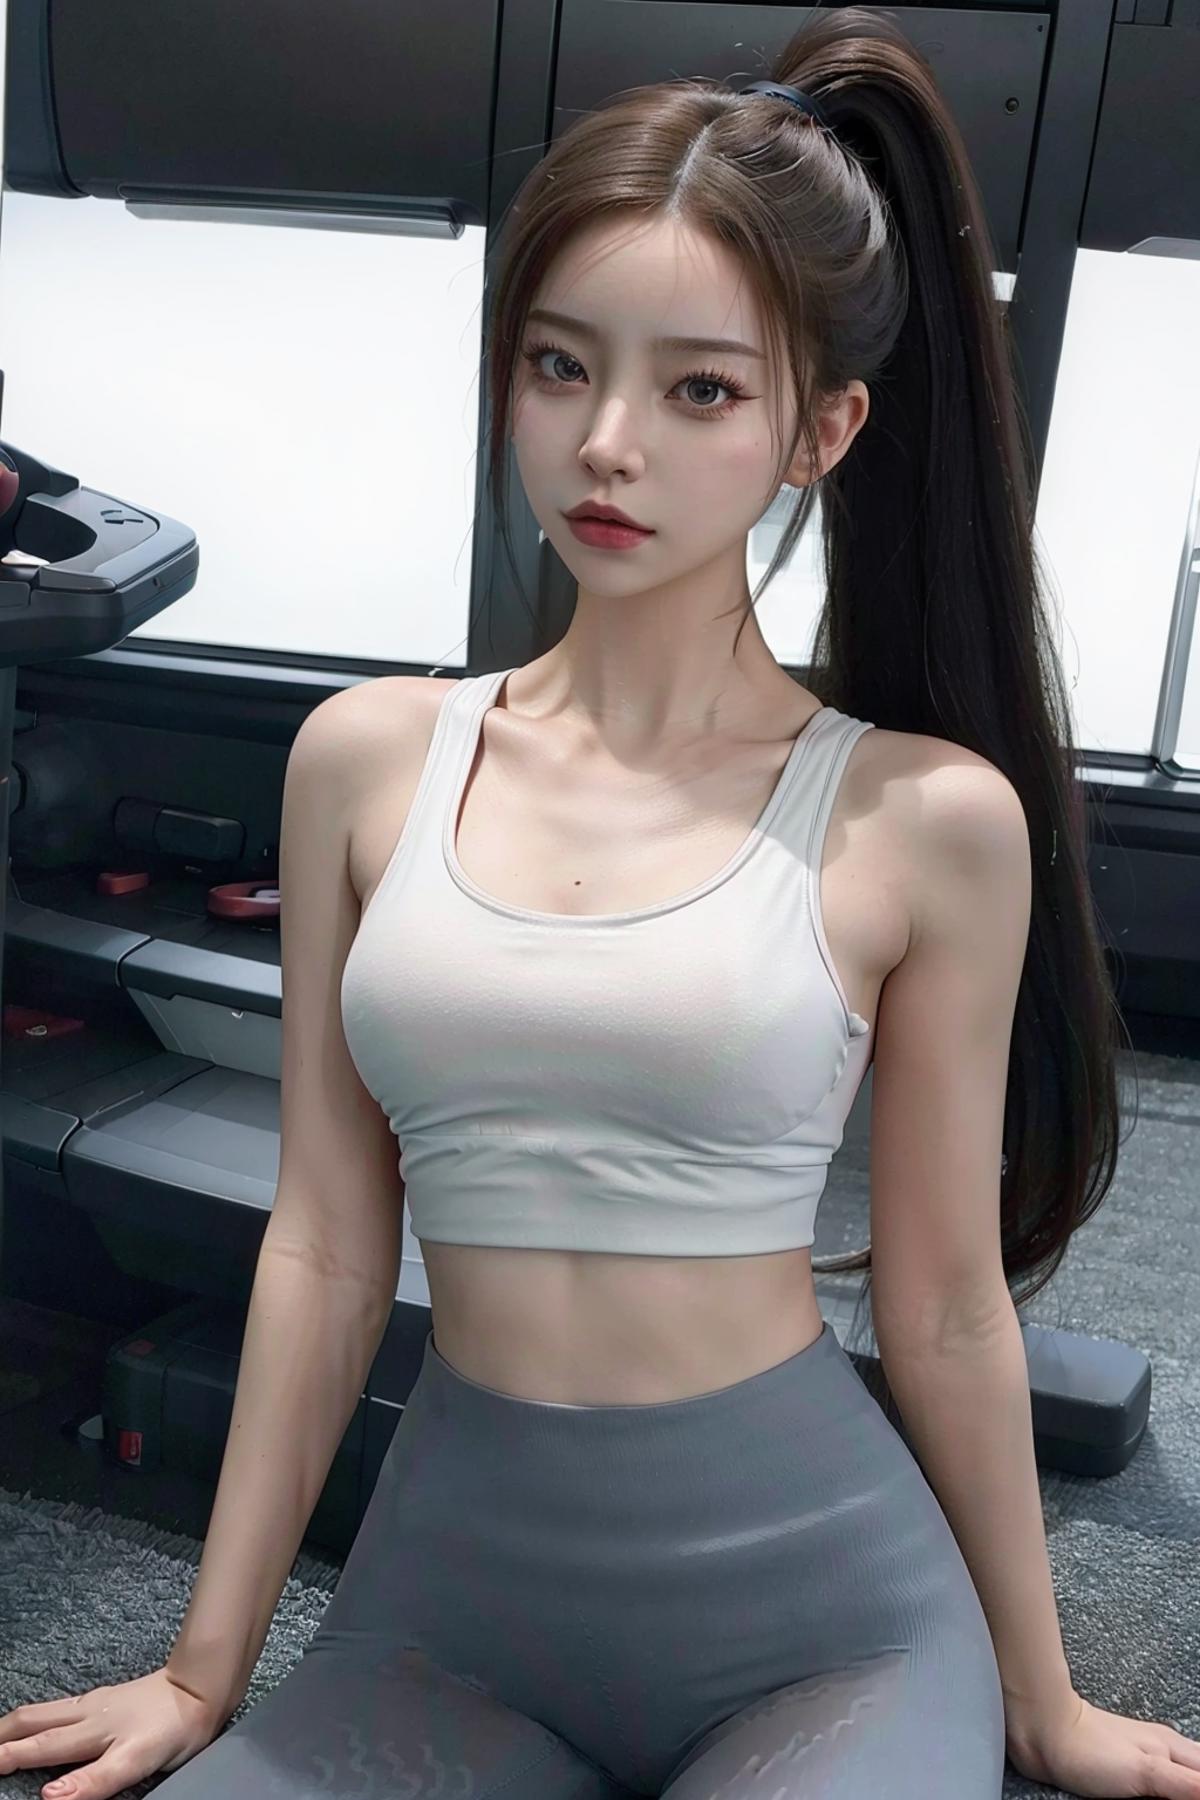 AI model image by AIGC_StaR